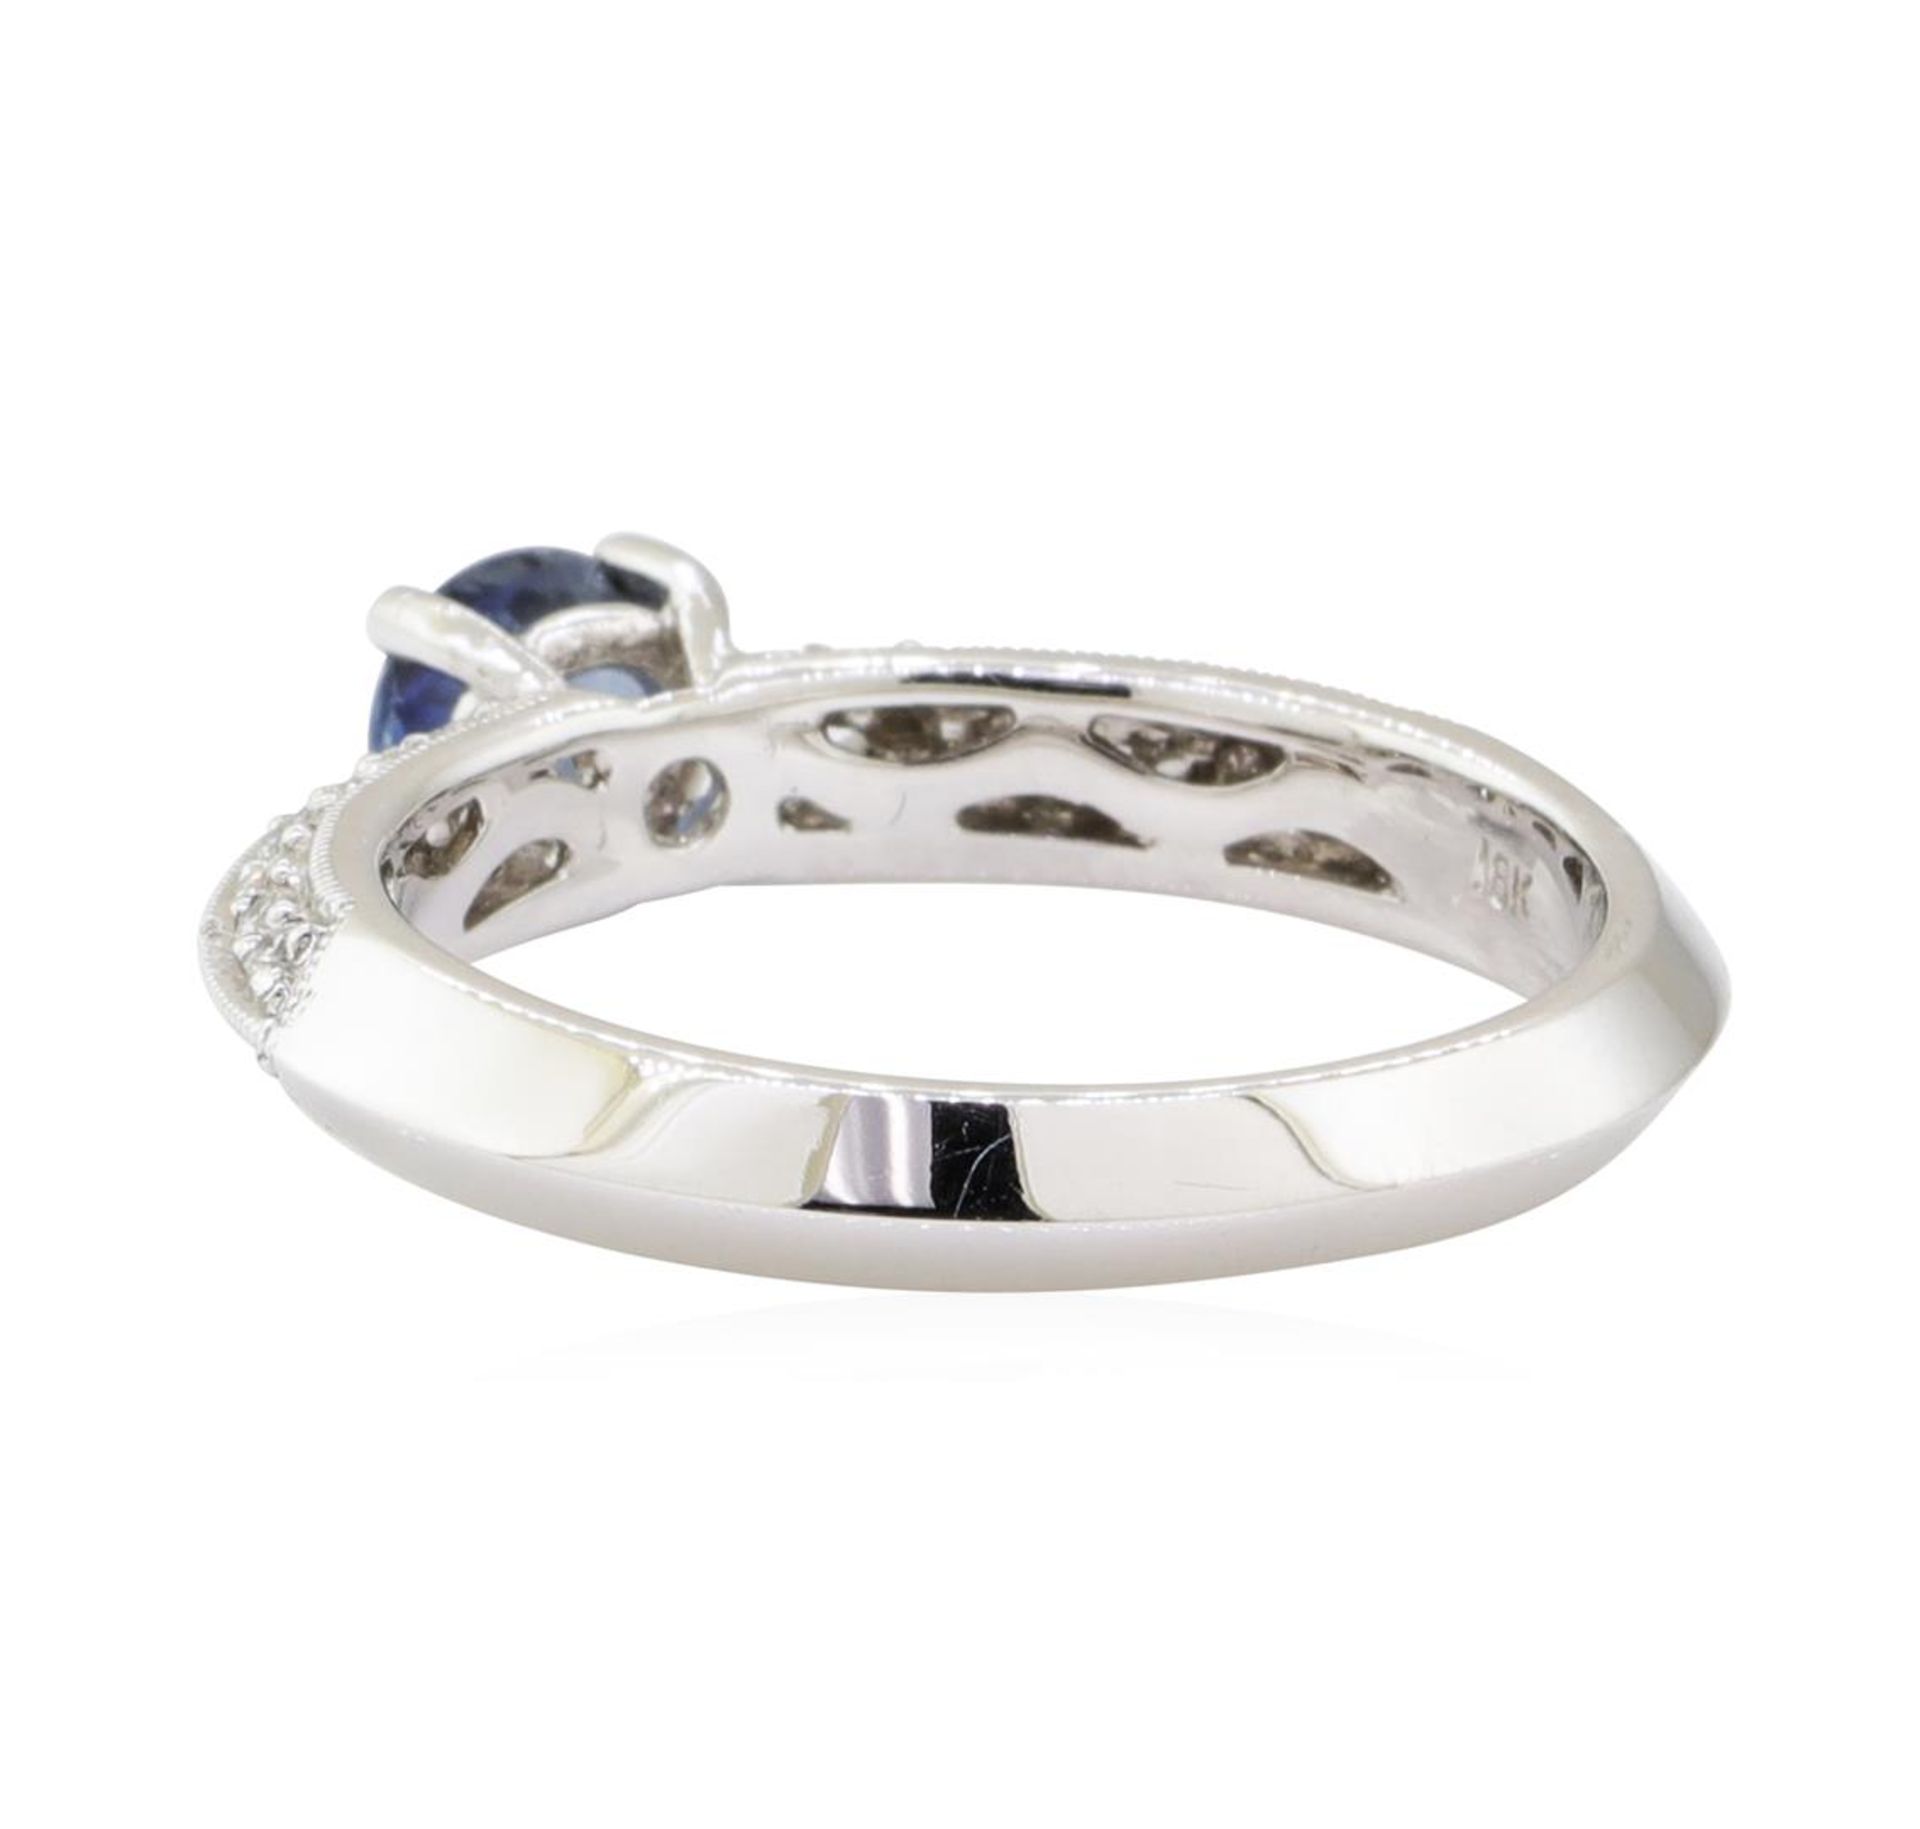 0.75 ctw Sapphire and Diamond Ring - 18KT White Gold - Image 3 of 4